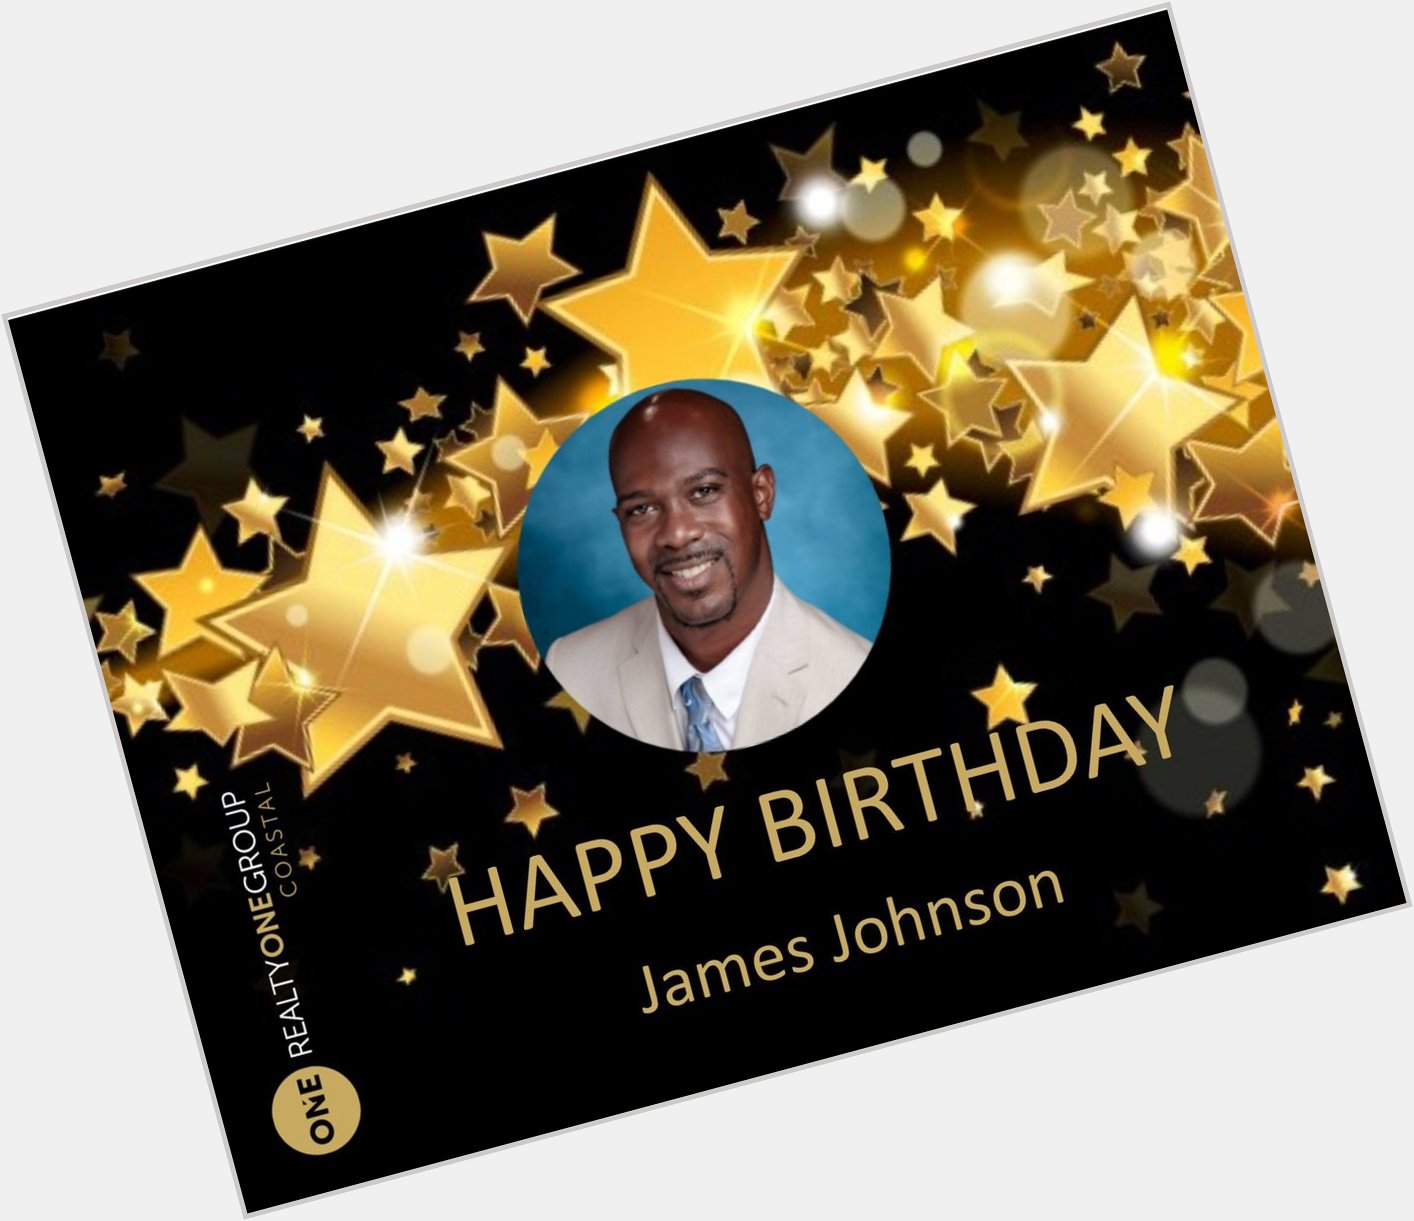 Please join us in wishing James Johnson a very Happy Birthday! 